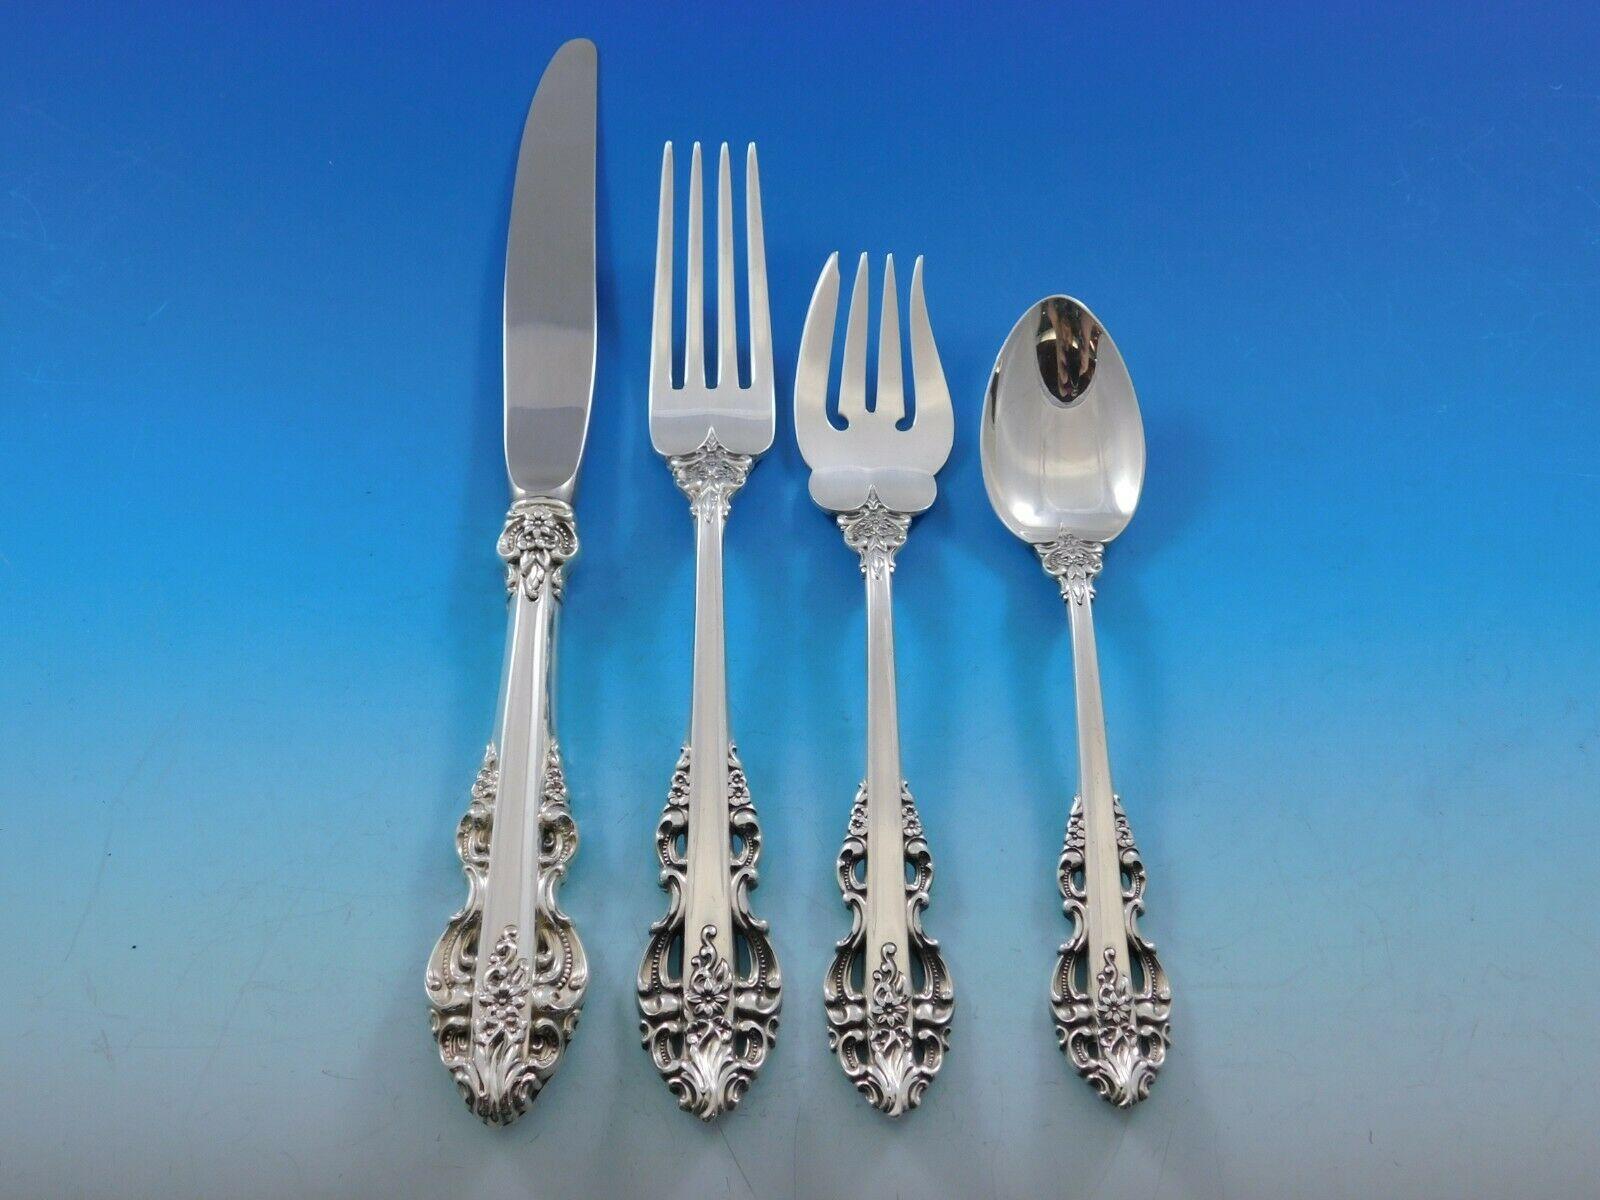 El Greco by Reed & Barton circa 1972 sterling silver flatware set with unique pierced handle and many unusual pieces - 79 pieces total. This set includes:

12 knives, 9 3/8